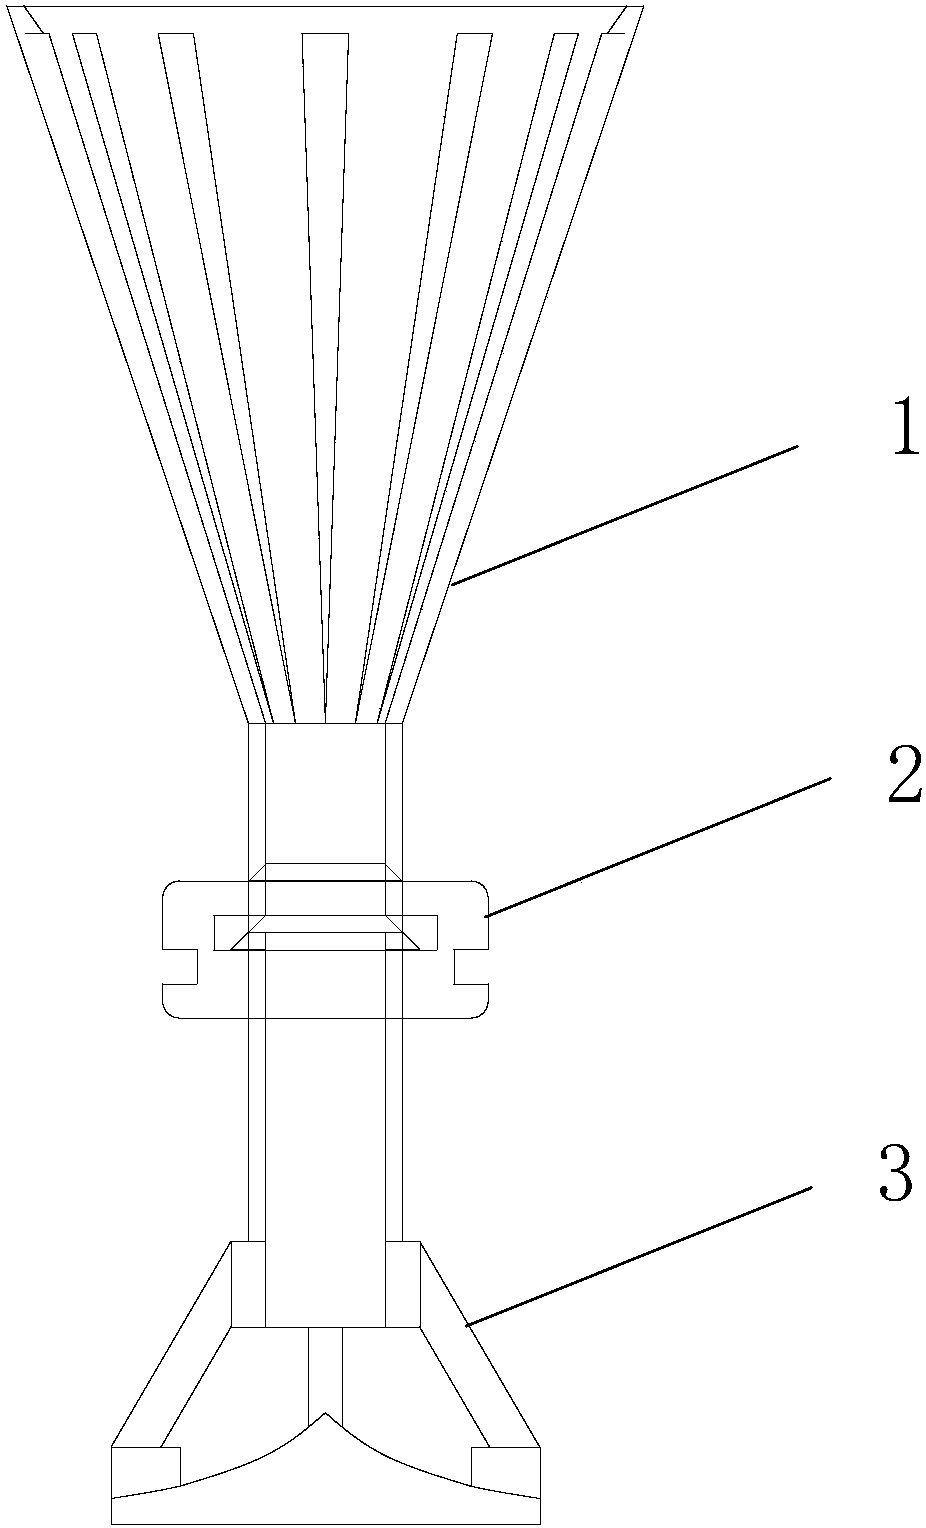 Heat source tabby liquid device with variable flow self-adaptive function